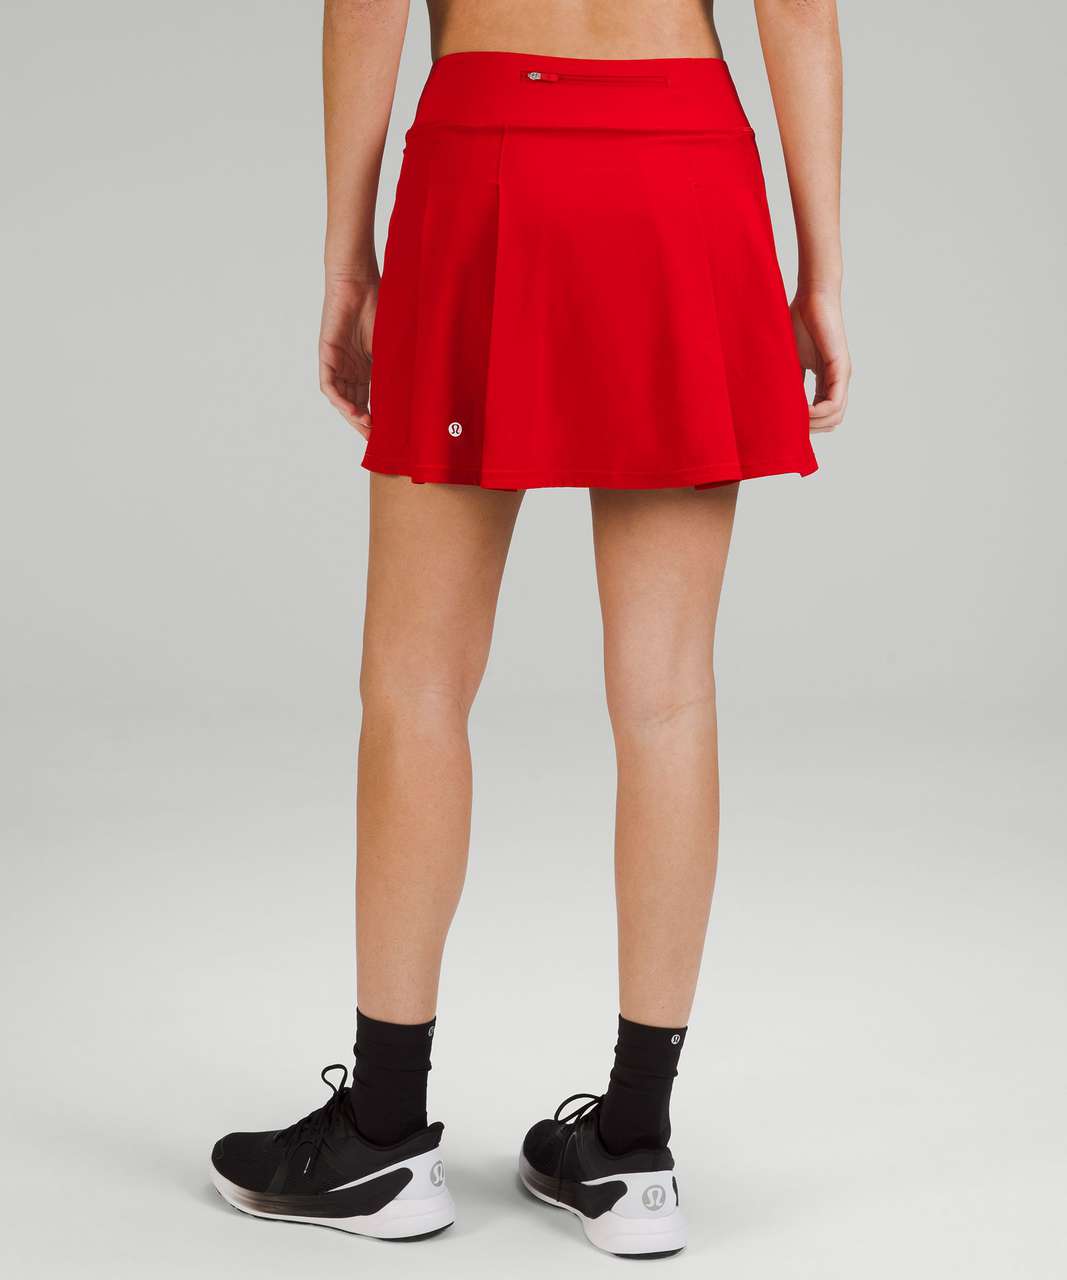 Lululemon Pace Rival Mid-Rise Skirt *Extra Long - Dark Red